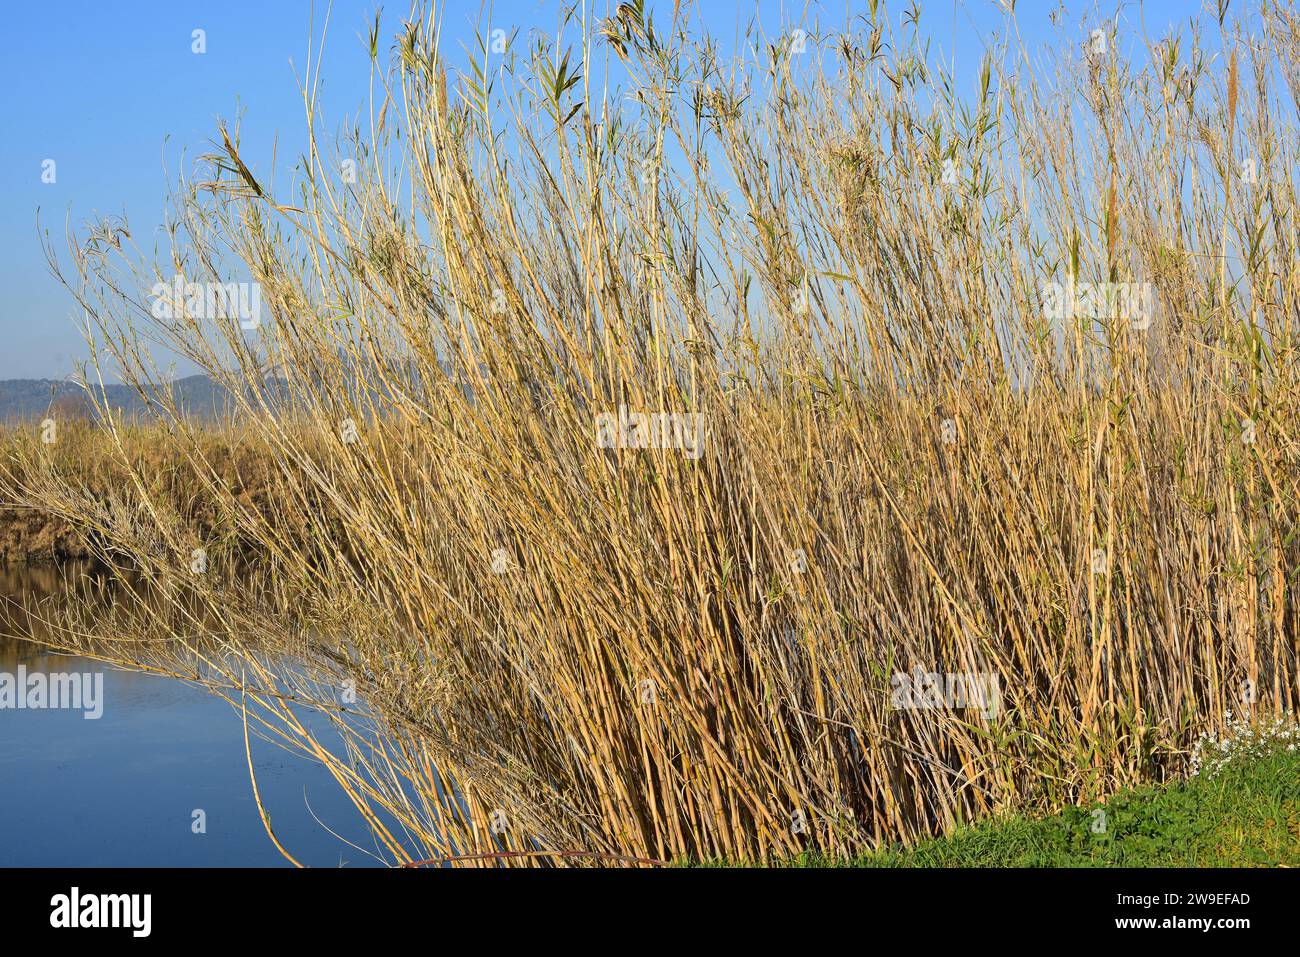 Giant cane, giant reed or wild cane (Arundo donax) is a perennial grass native to Mediterranean Basin. This photo was taken in Ter river, Emporda, Gir Stock Photo